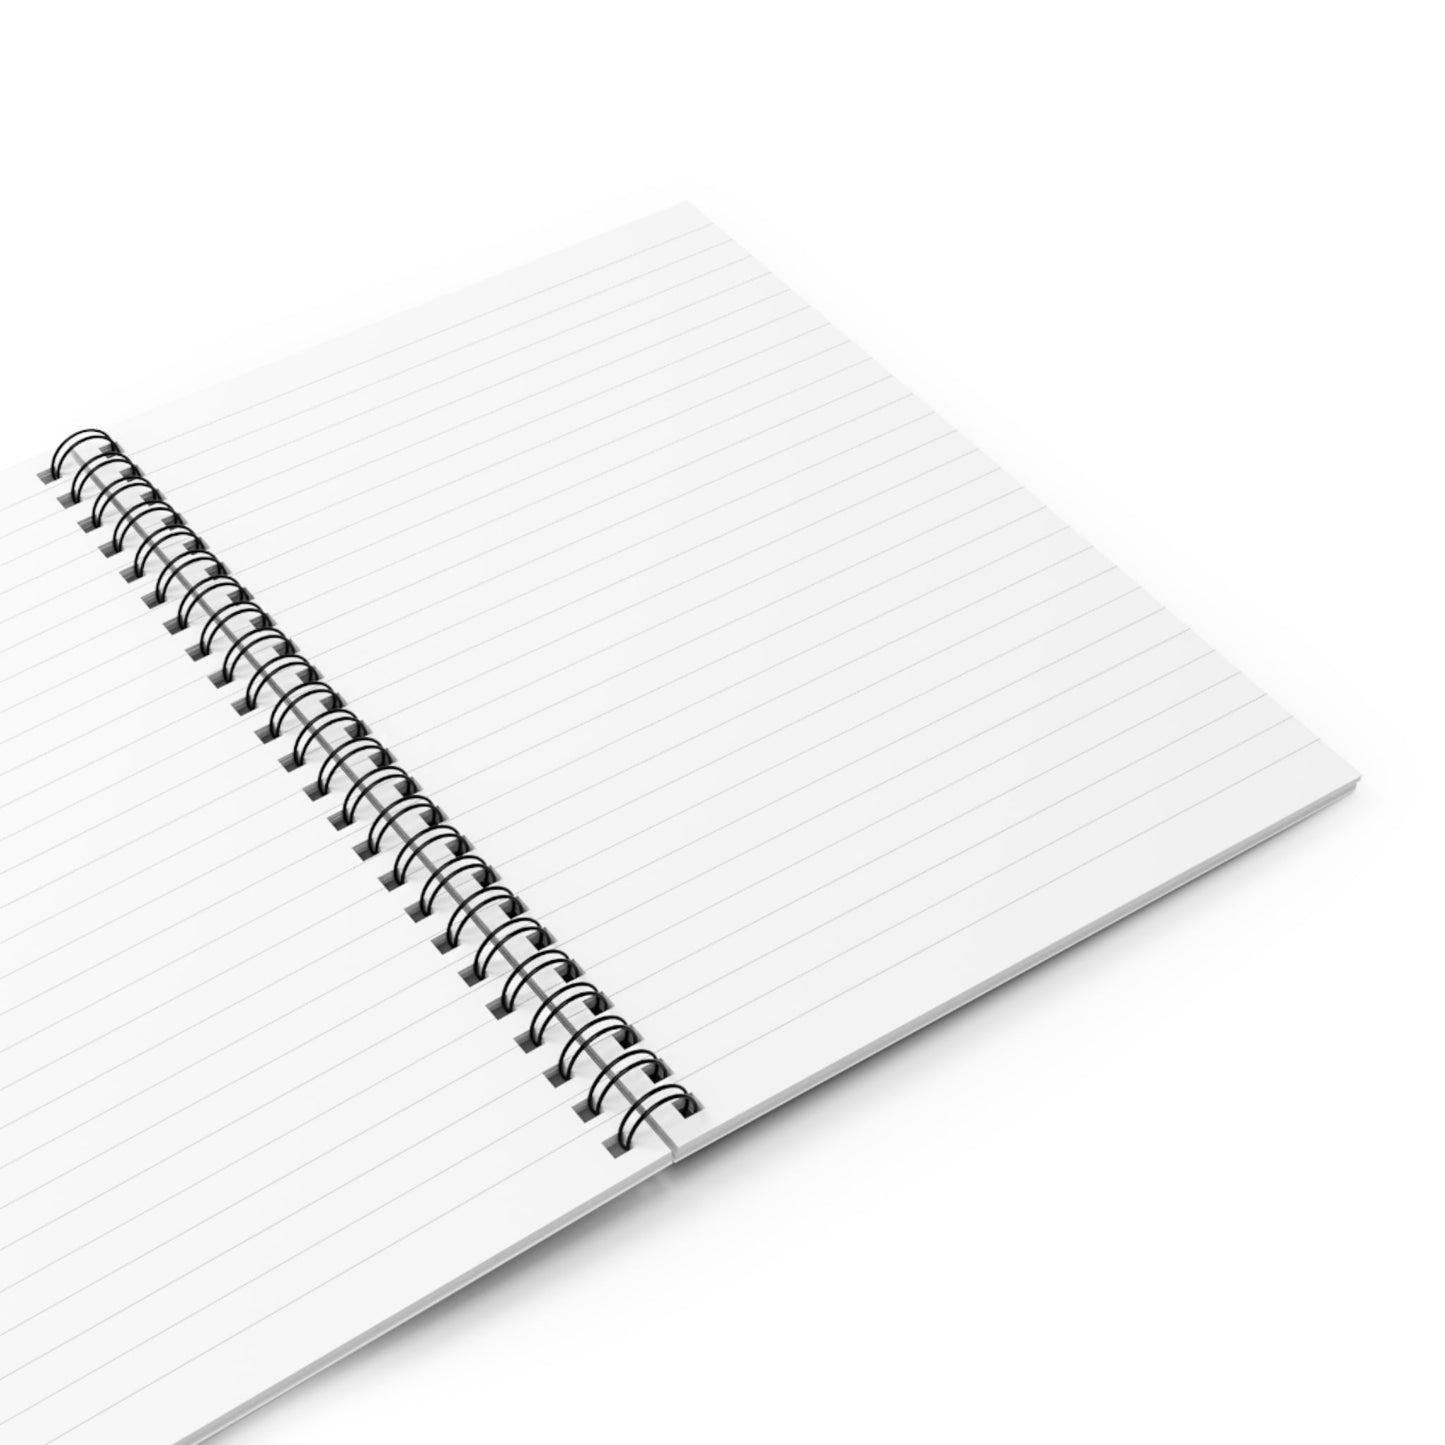 Spiral Notebook with Famous Cover Opened with Blank White College Ruled Pages